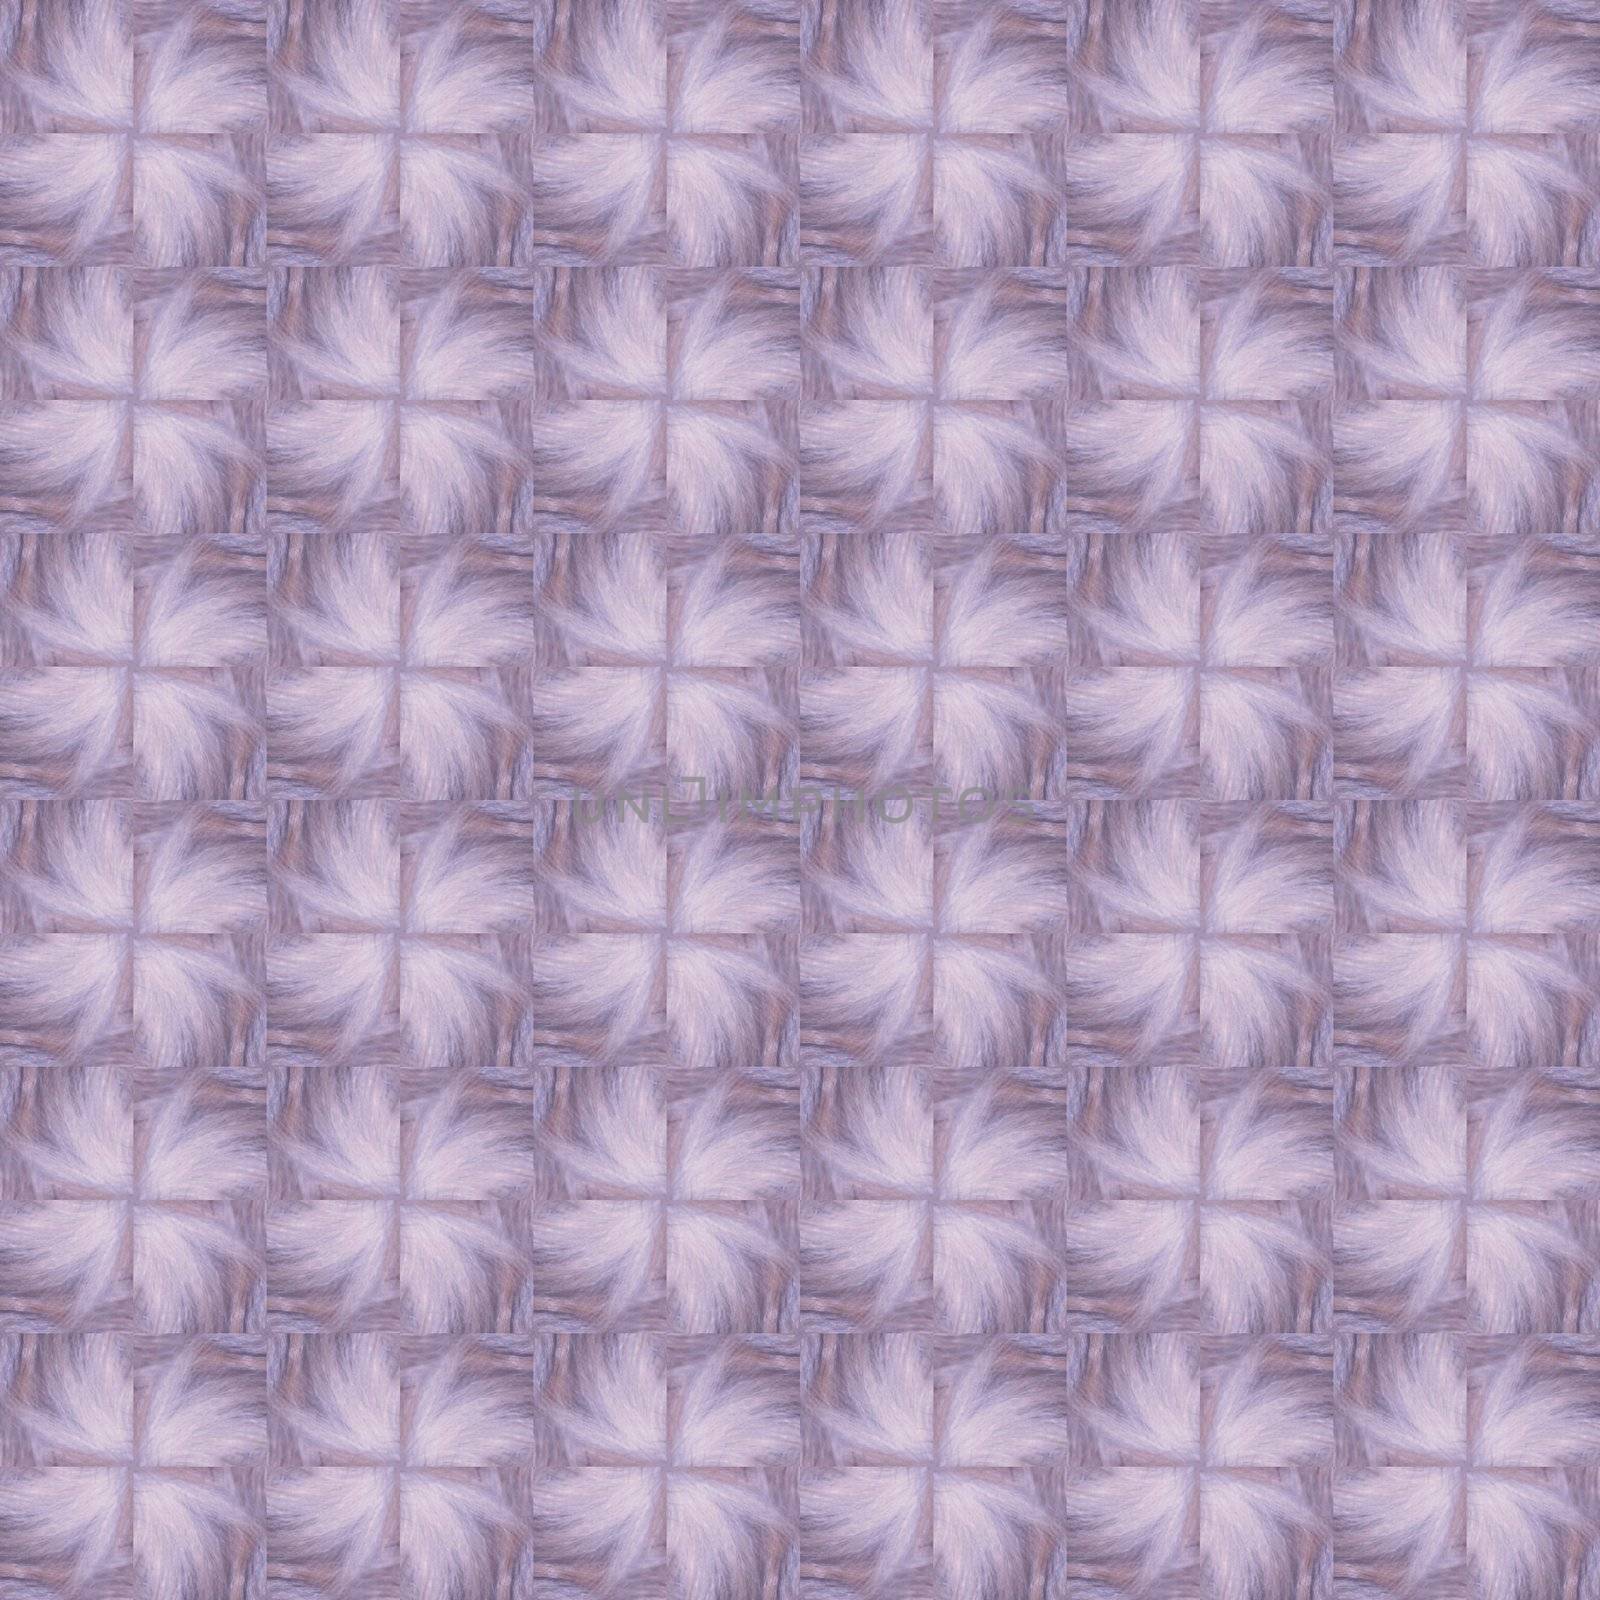 Seamless tileable background. Big lilac fur flowers retro texture with an old-fashioned twist